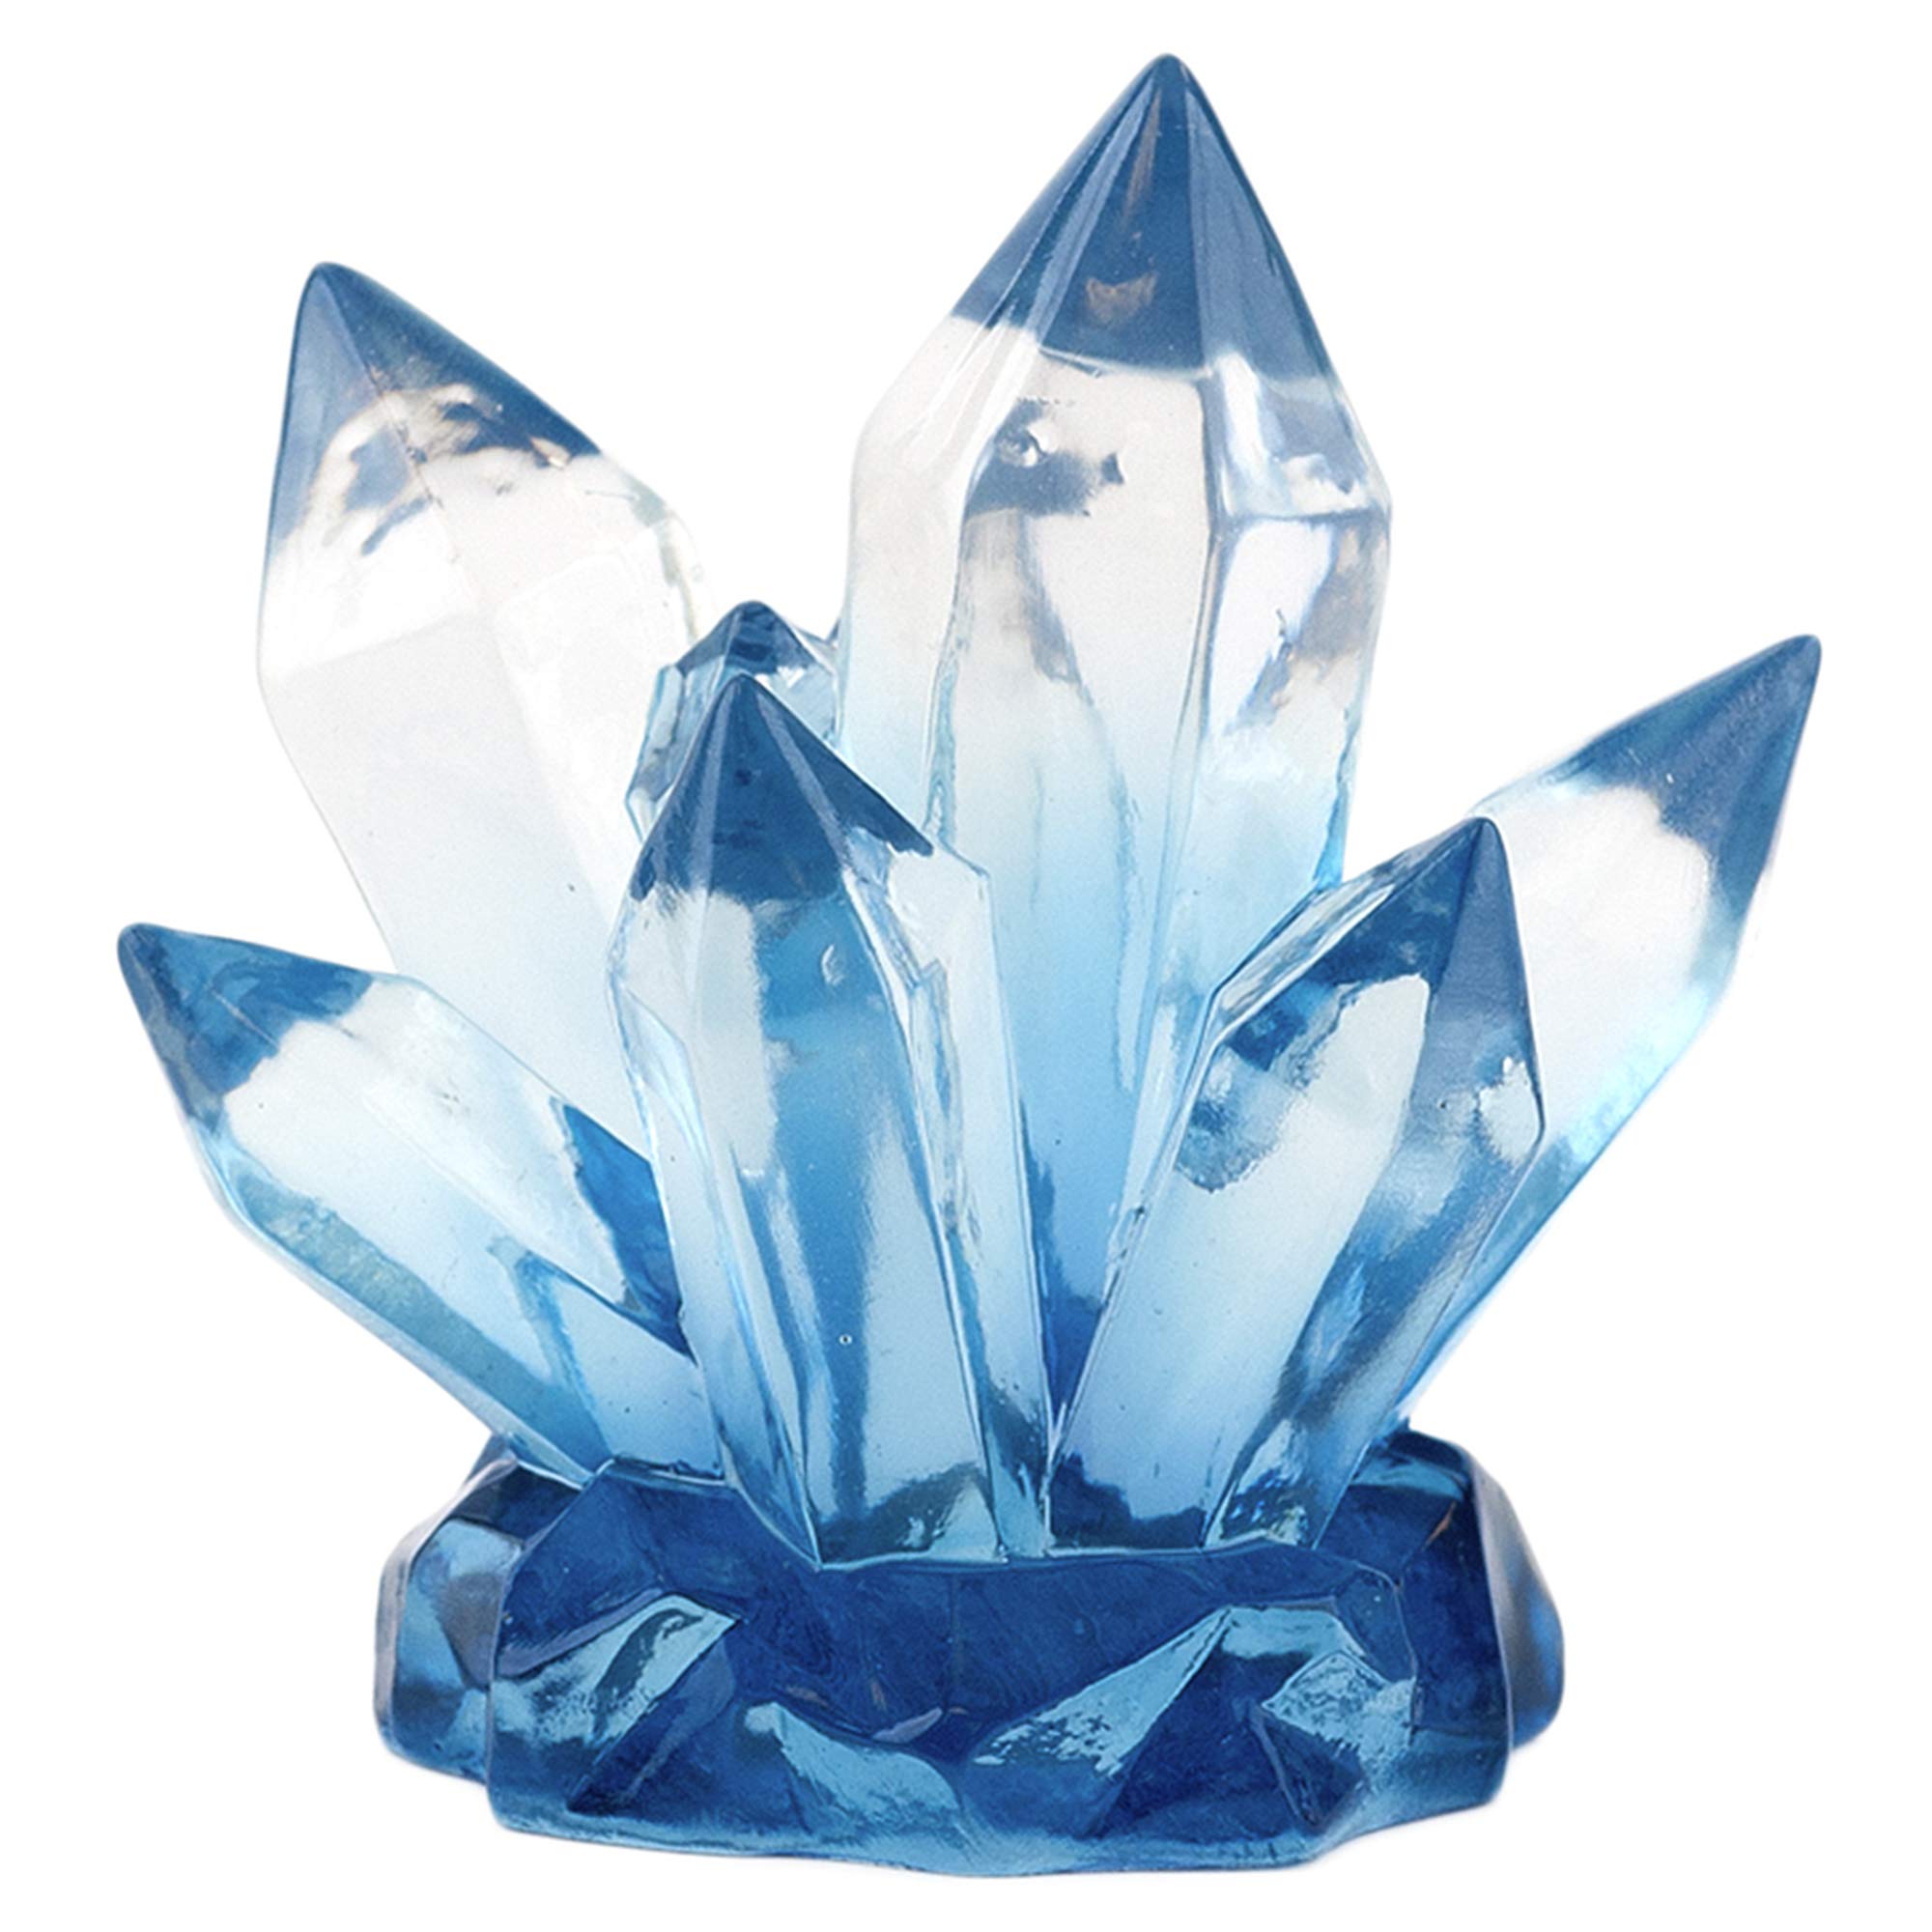 Penn Plax Deco-Replicas Crystal Cluster and Crystal Cave Aquarium Decorations (Sapphire Blue, Crystal Cluster)